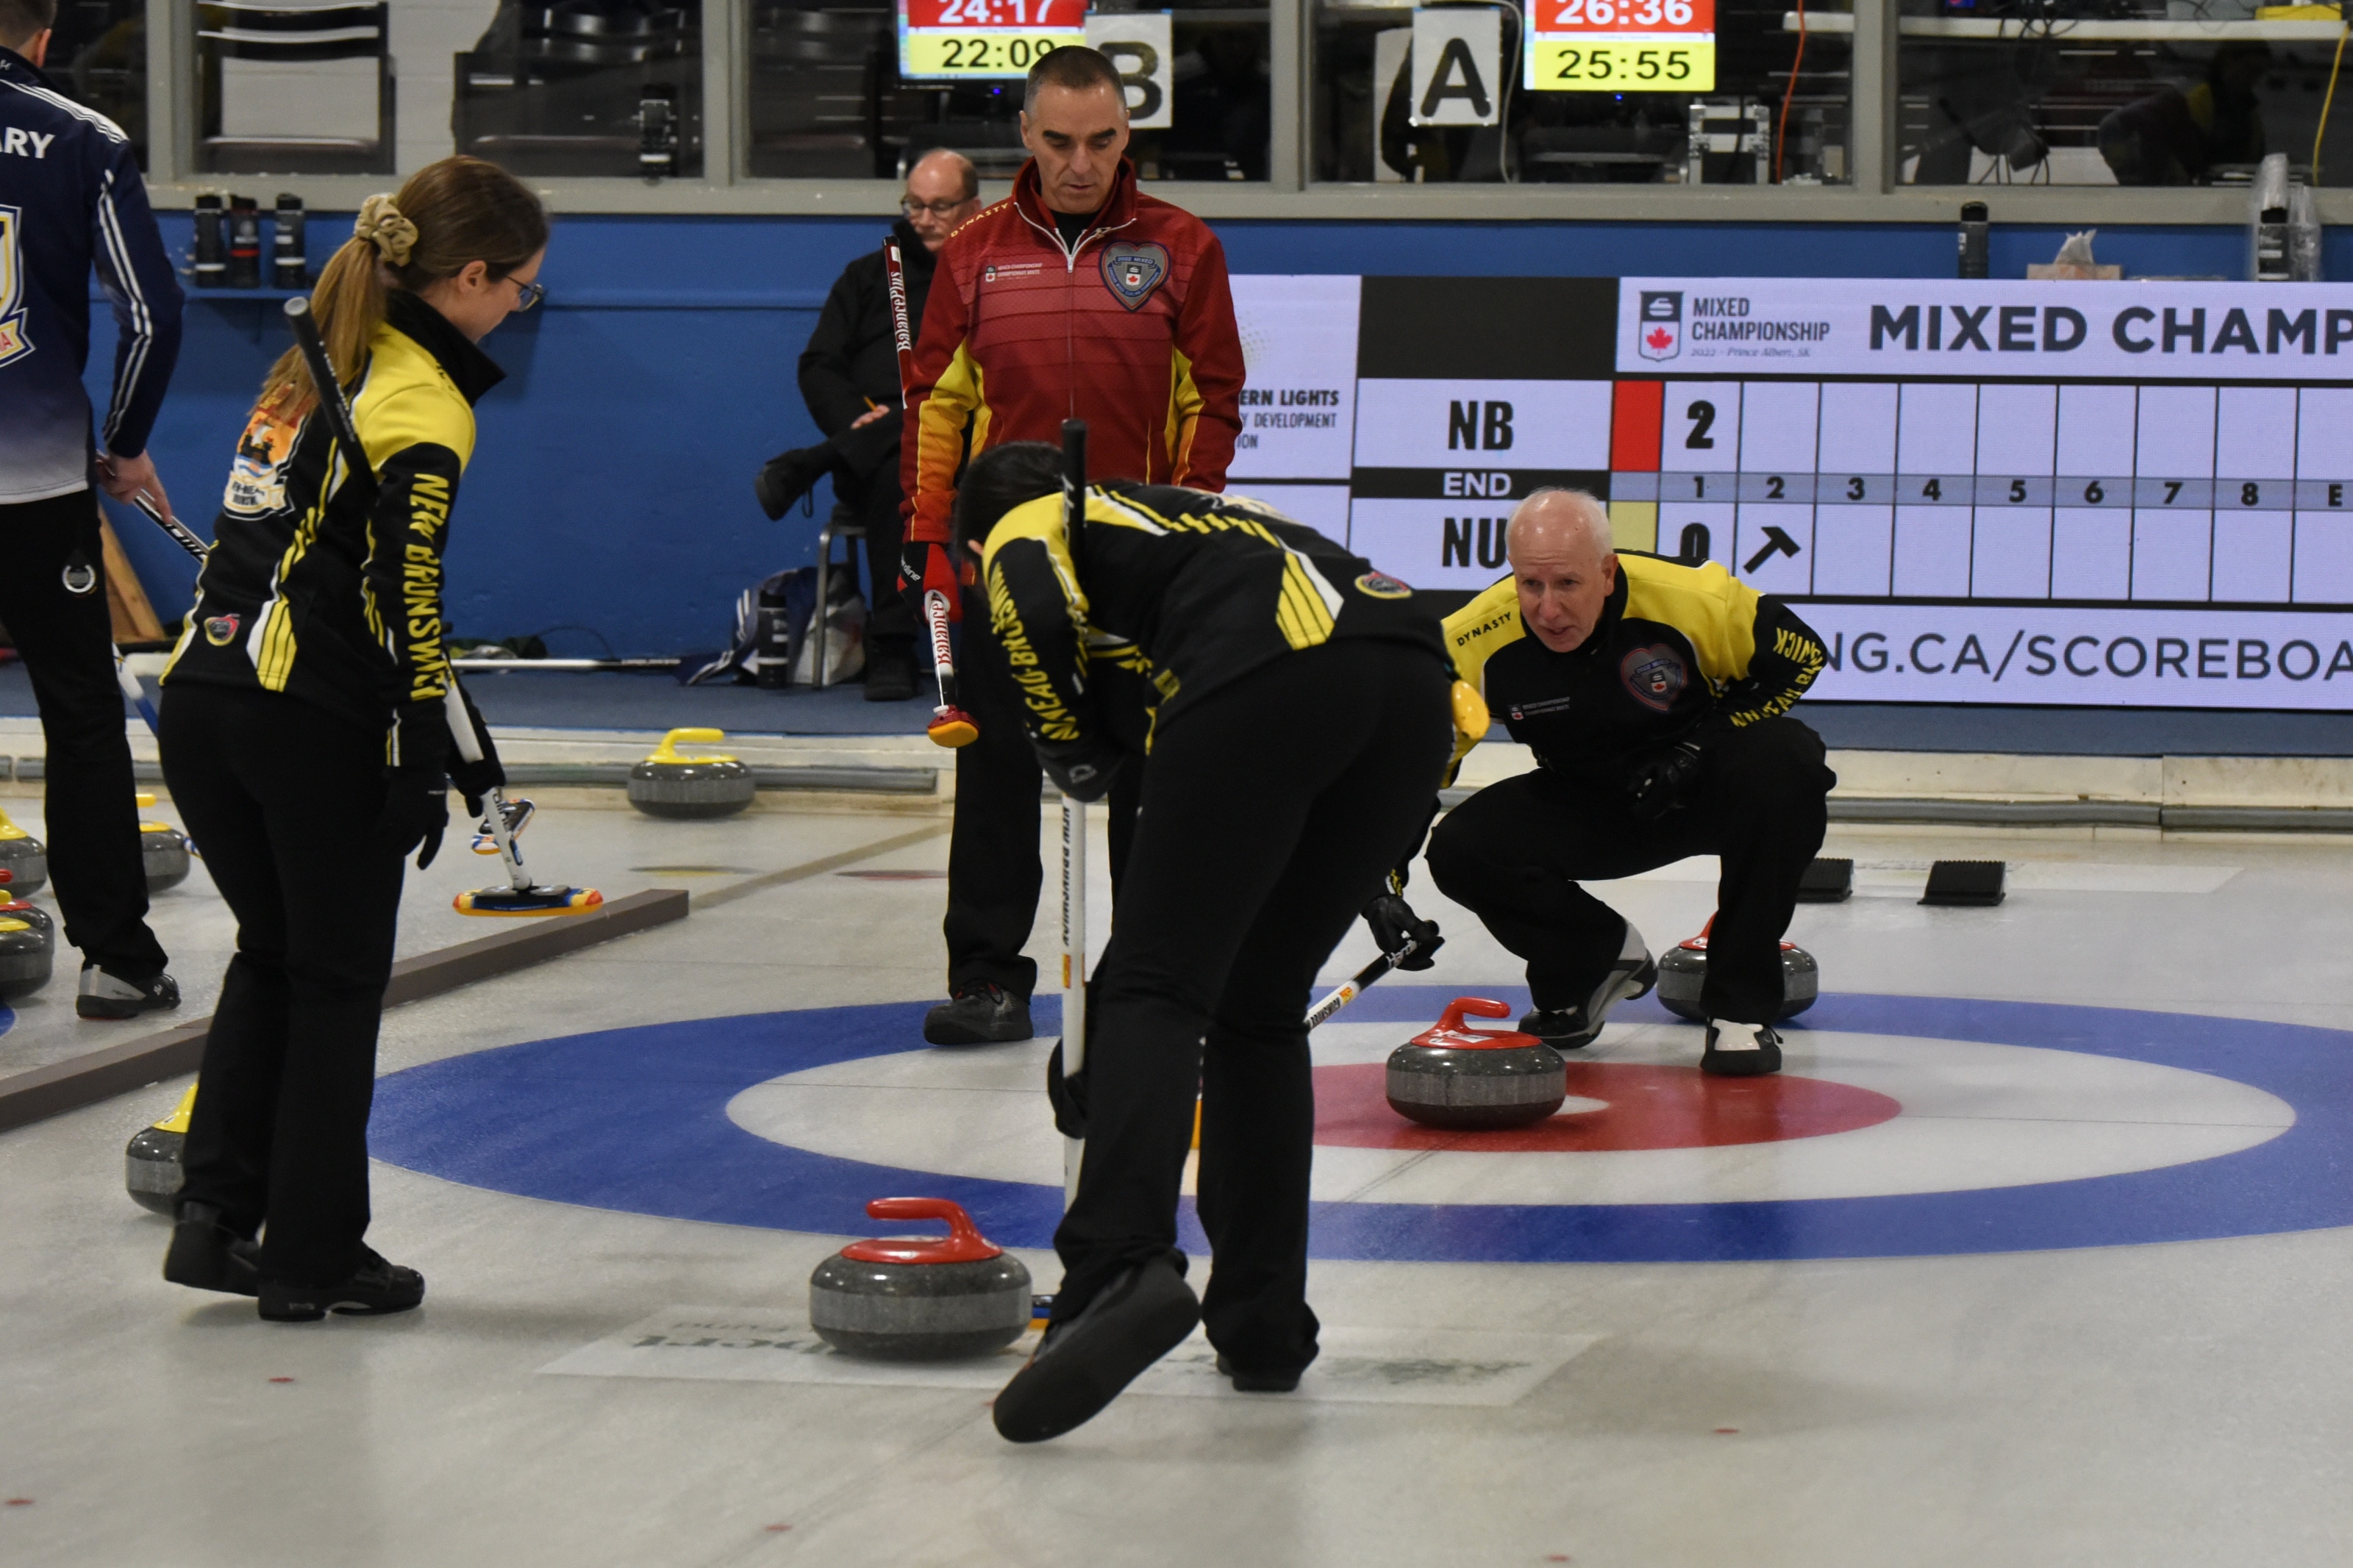 Curling Canada Strong Start for New Brunswick!